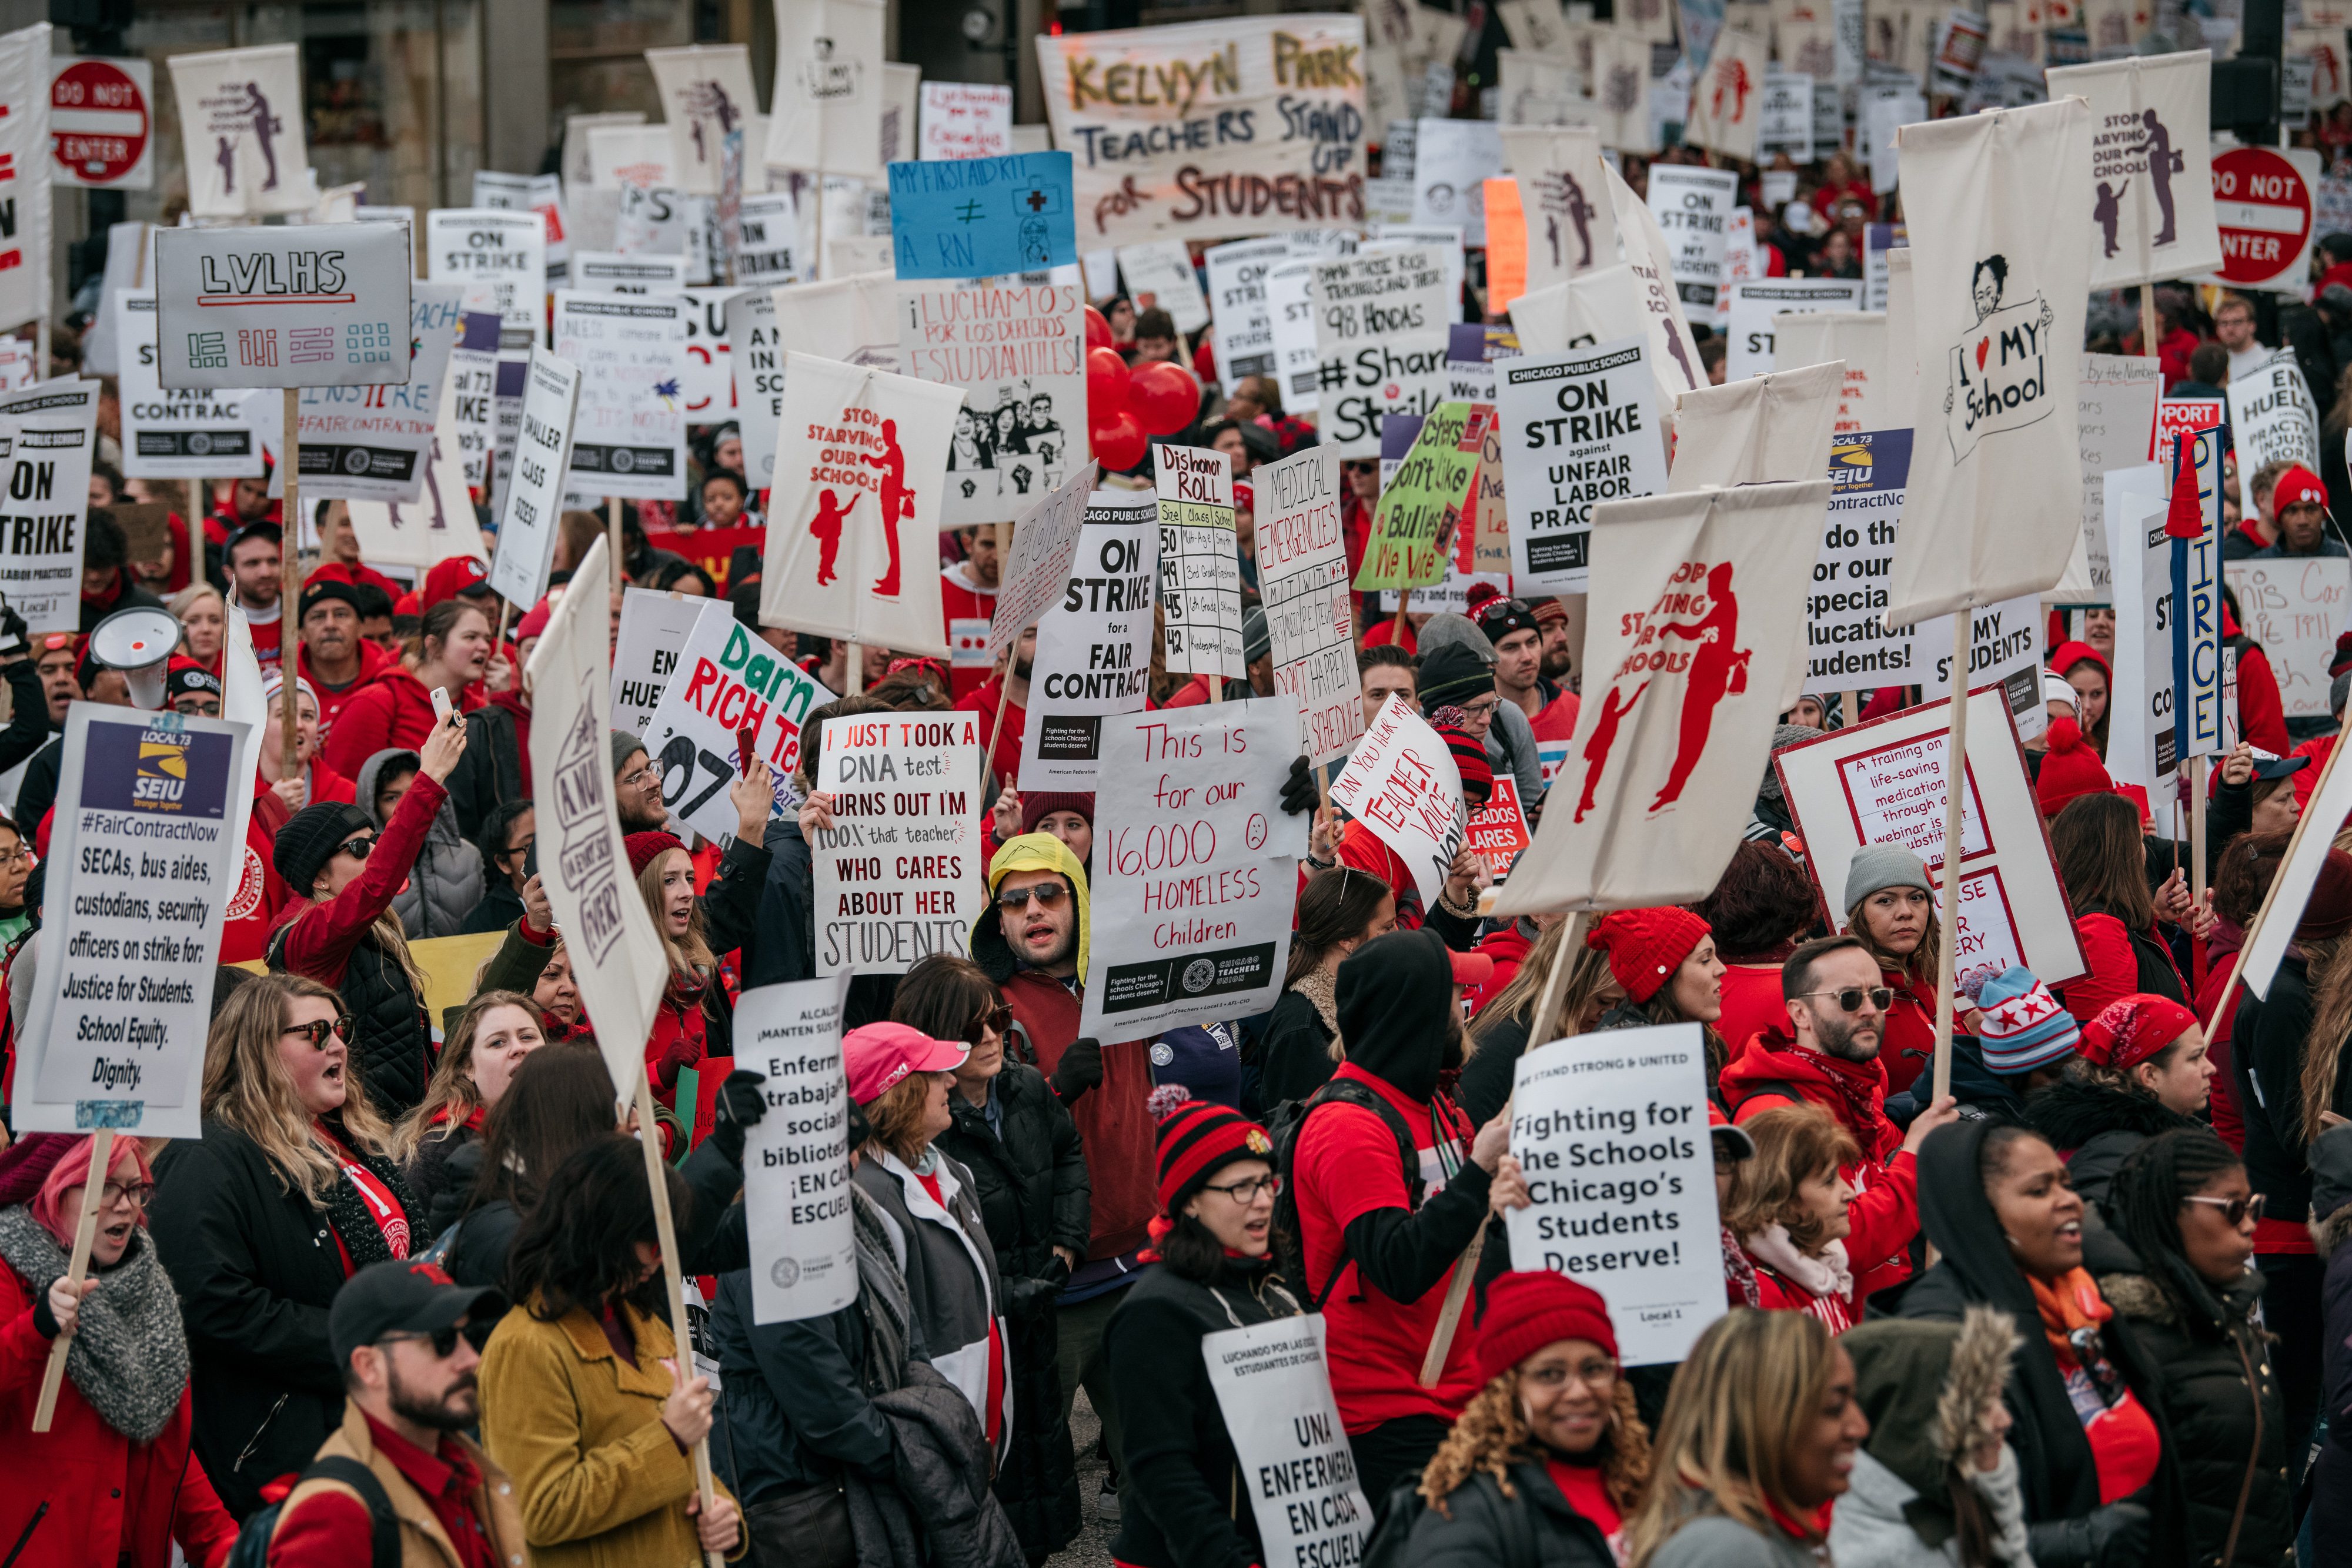 Demonstrators carry signs while marching during a teachers strike in downtown Chicago, Illinois, U.S., on Oct. 17, 2019. (Scott Heins—Bloomberg/Getty Images)